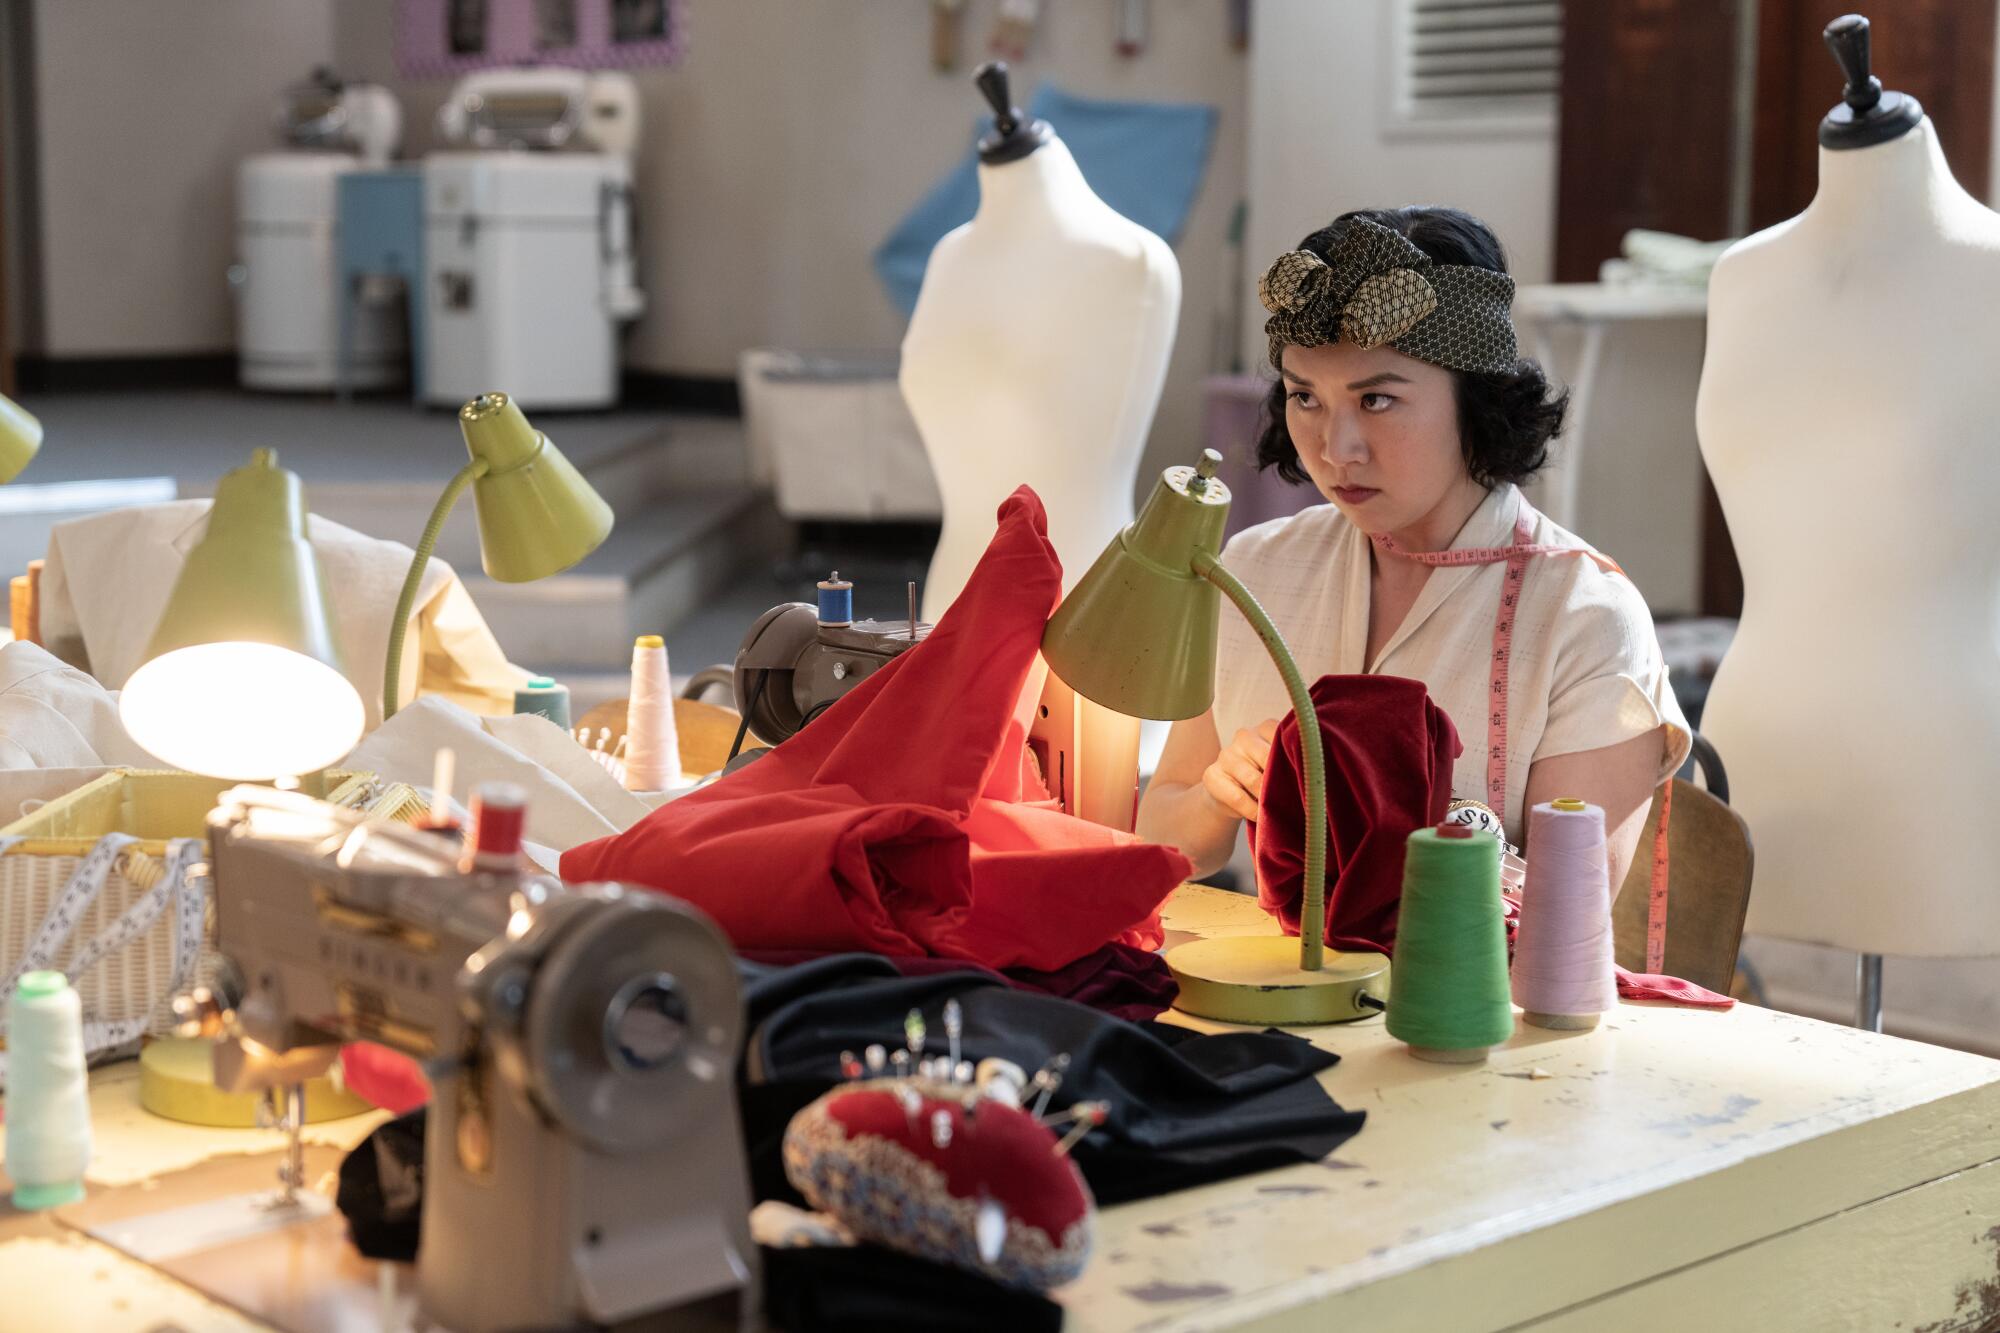 A young woman sits among fabric, thread and a sewing machine in a scene from "Grease: Rise of the Pink Ladies."